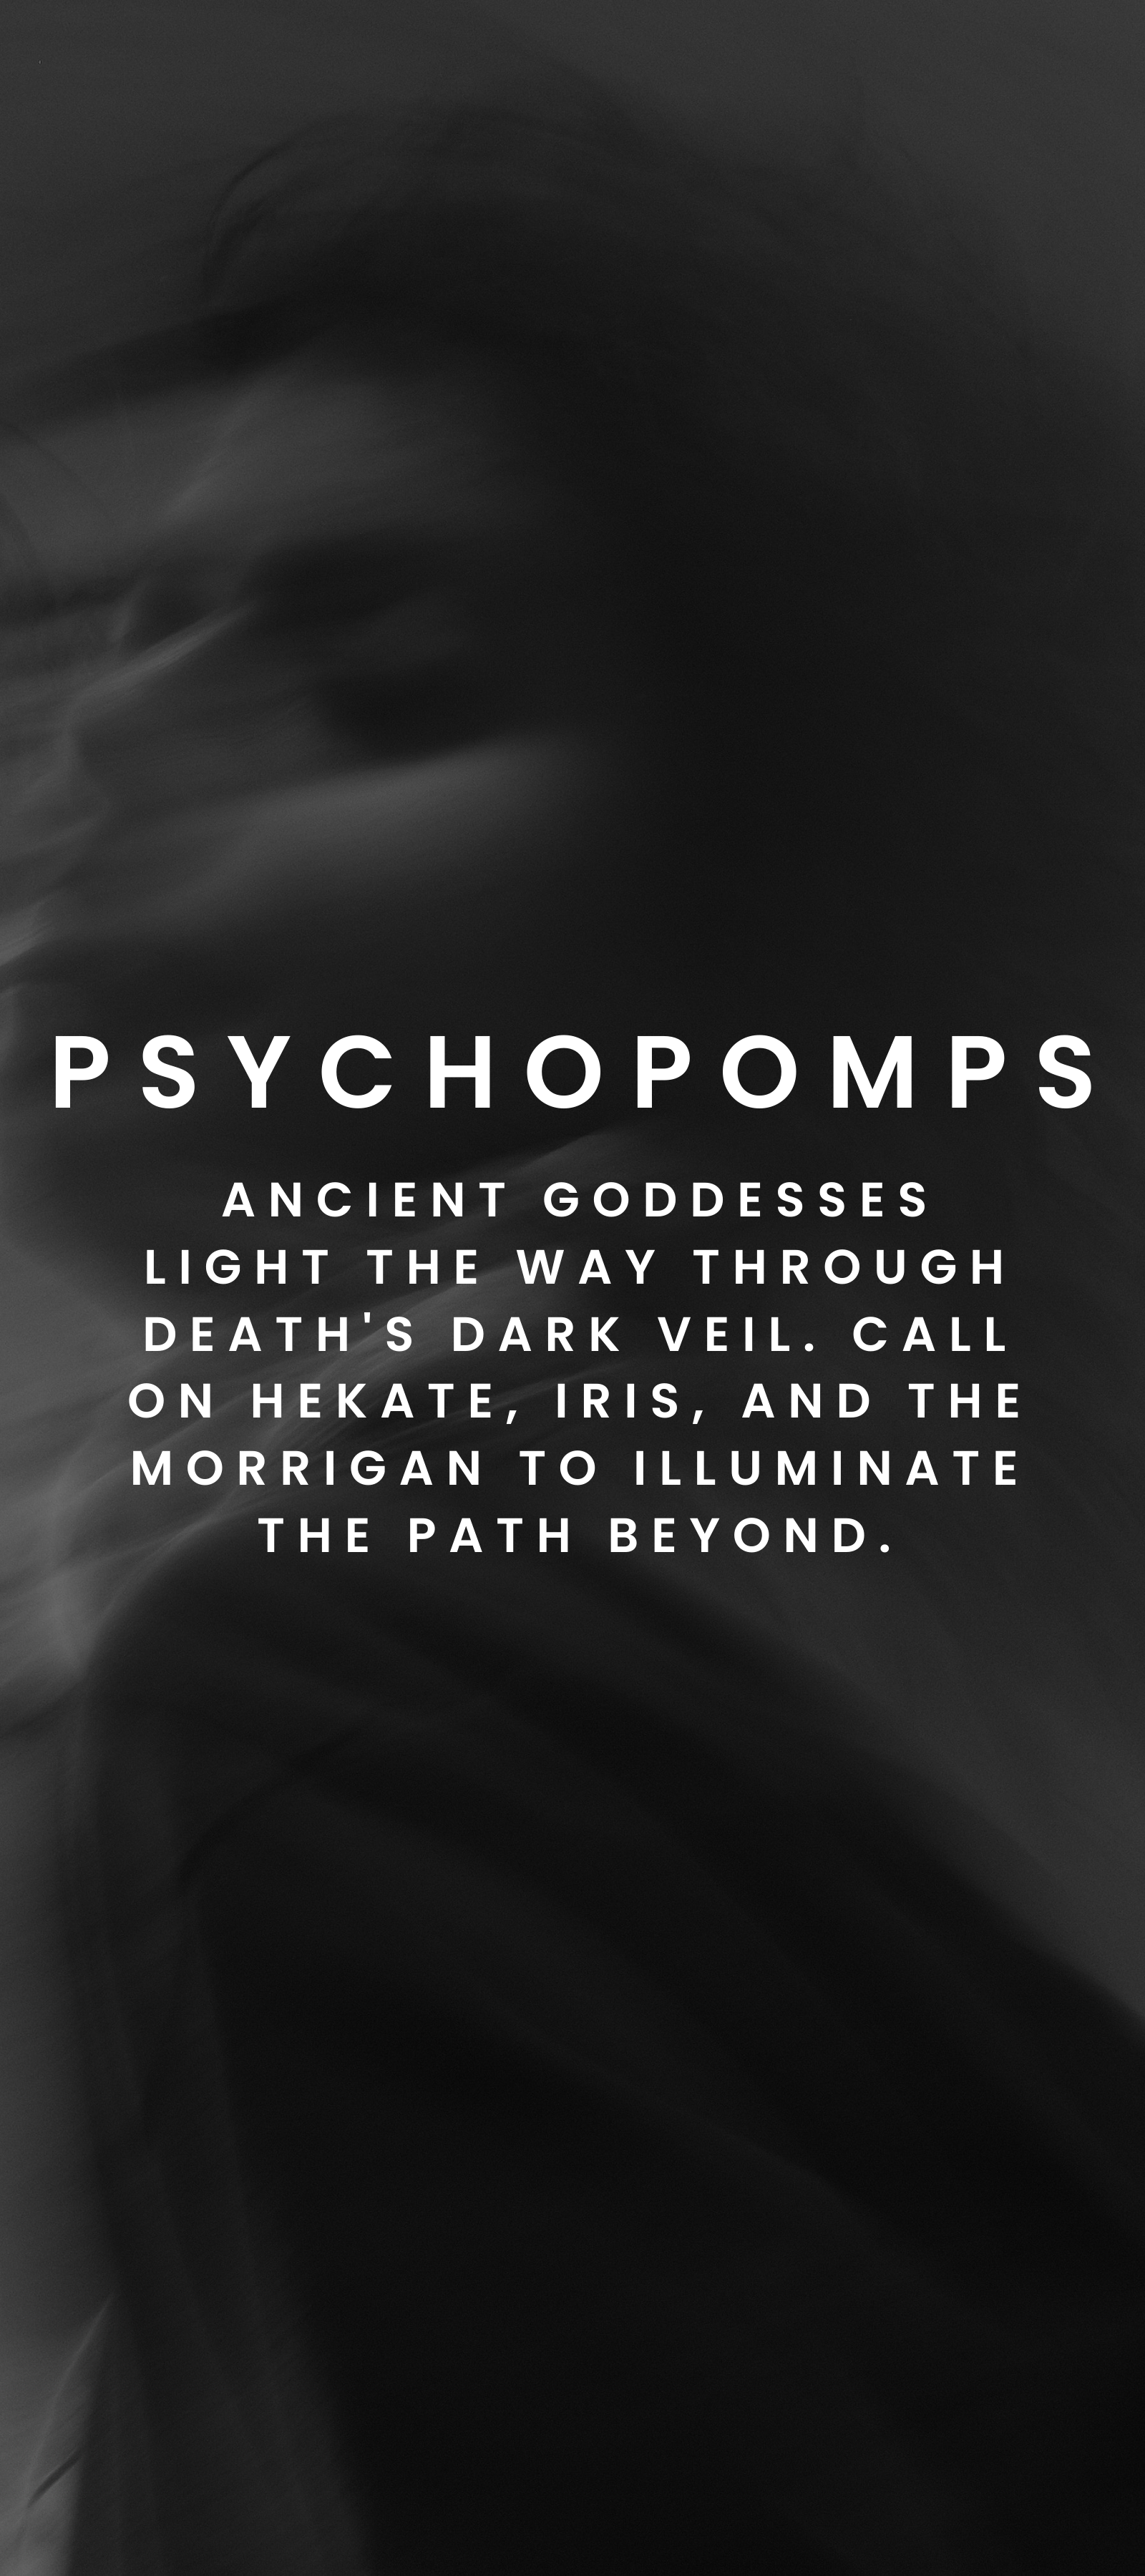 Psychopomps and spirit guides